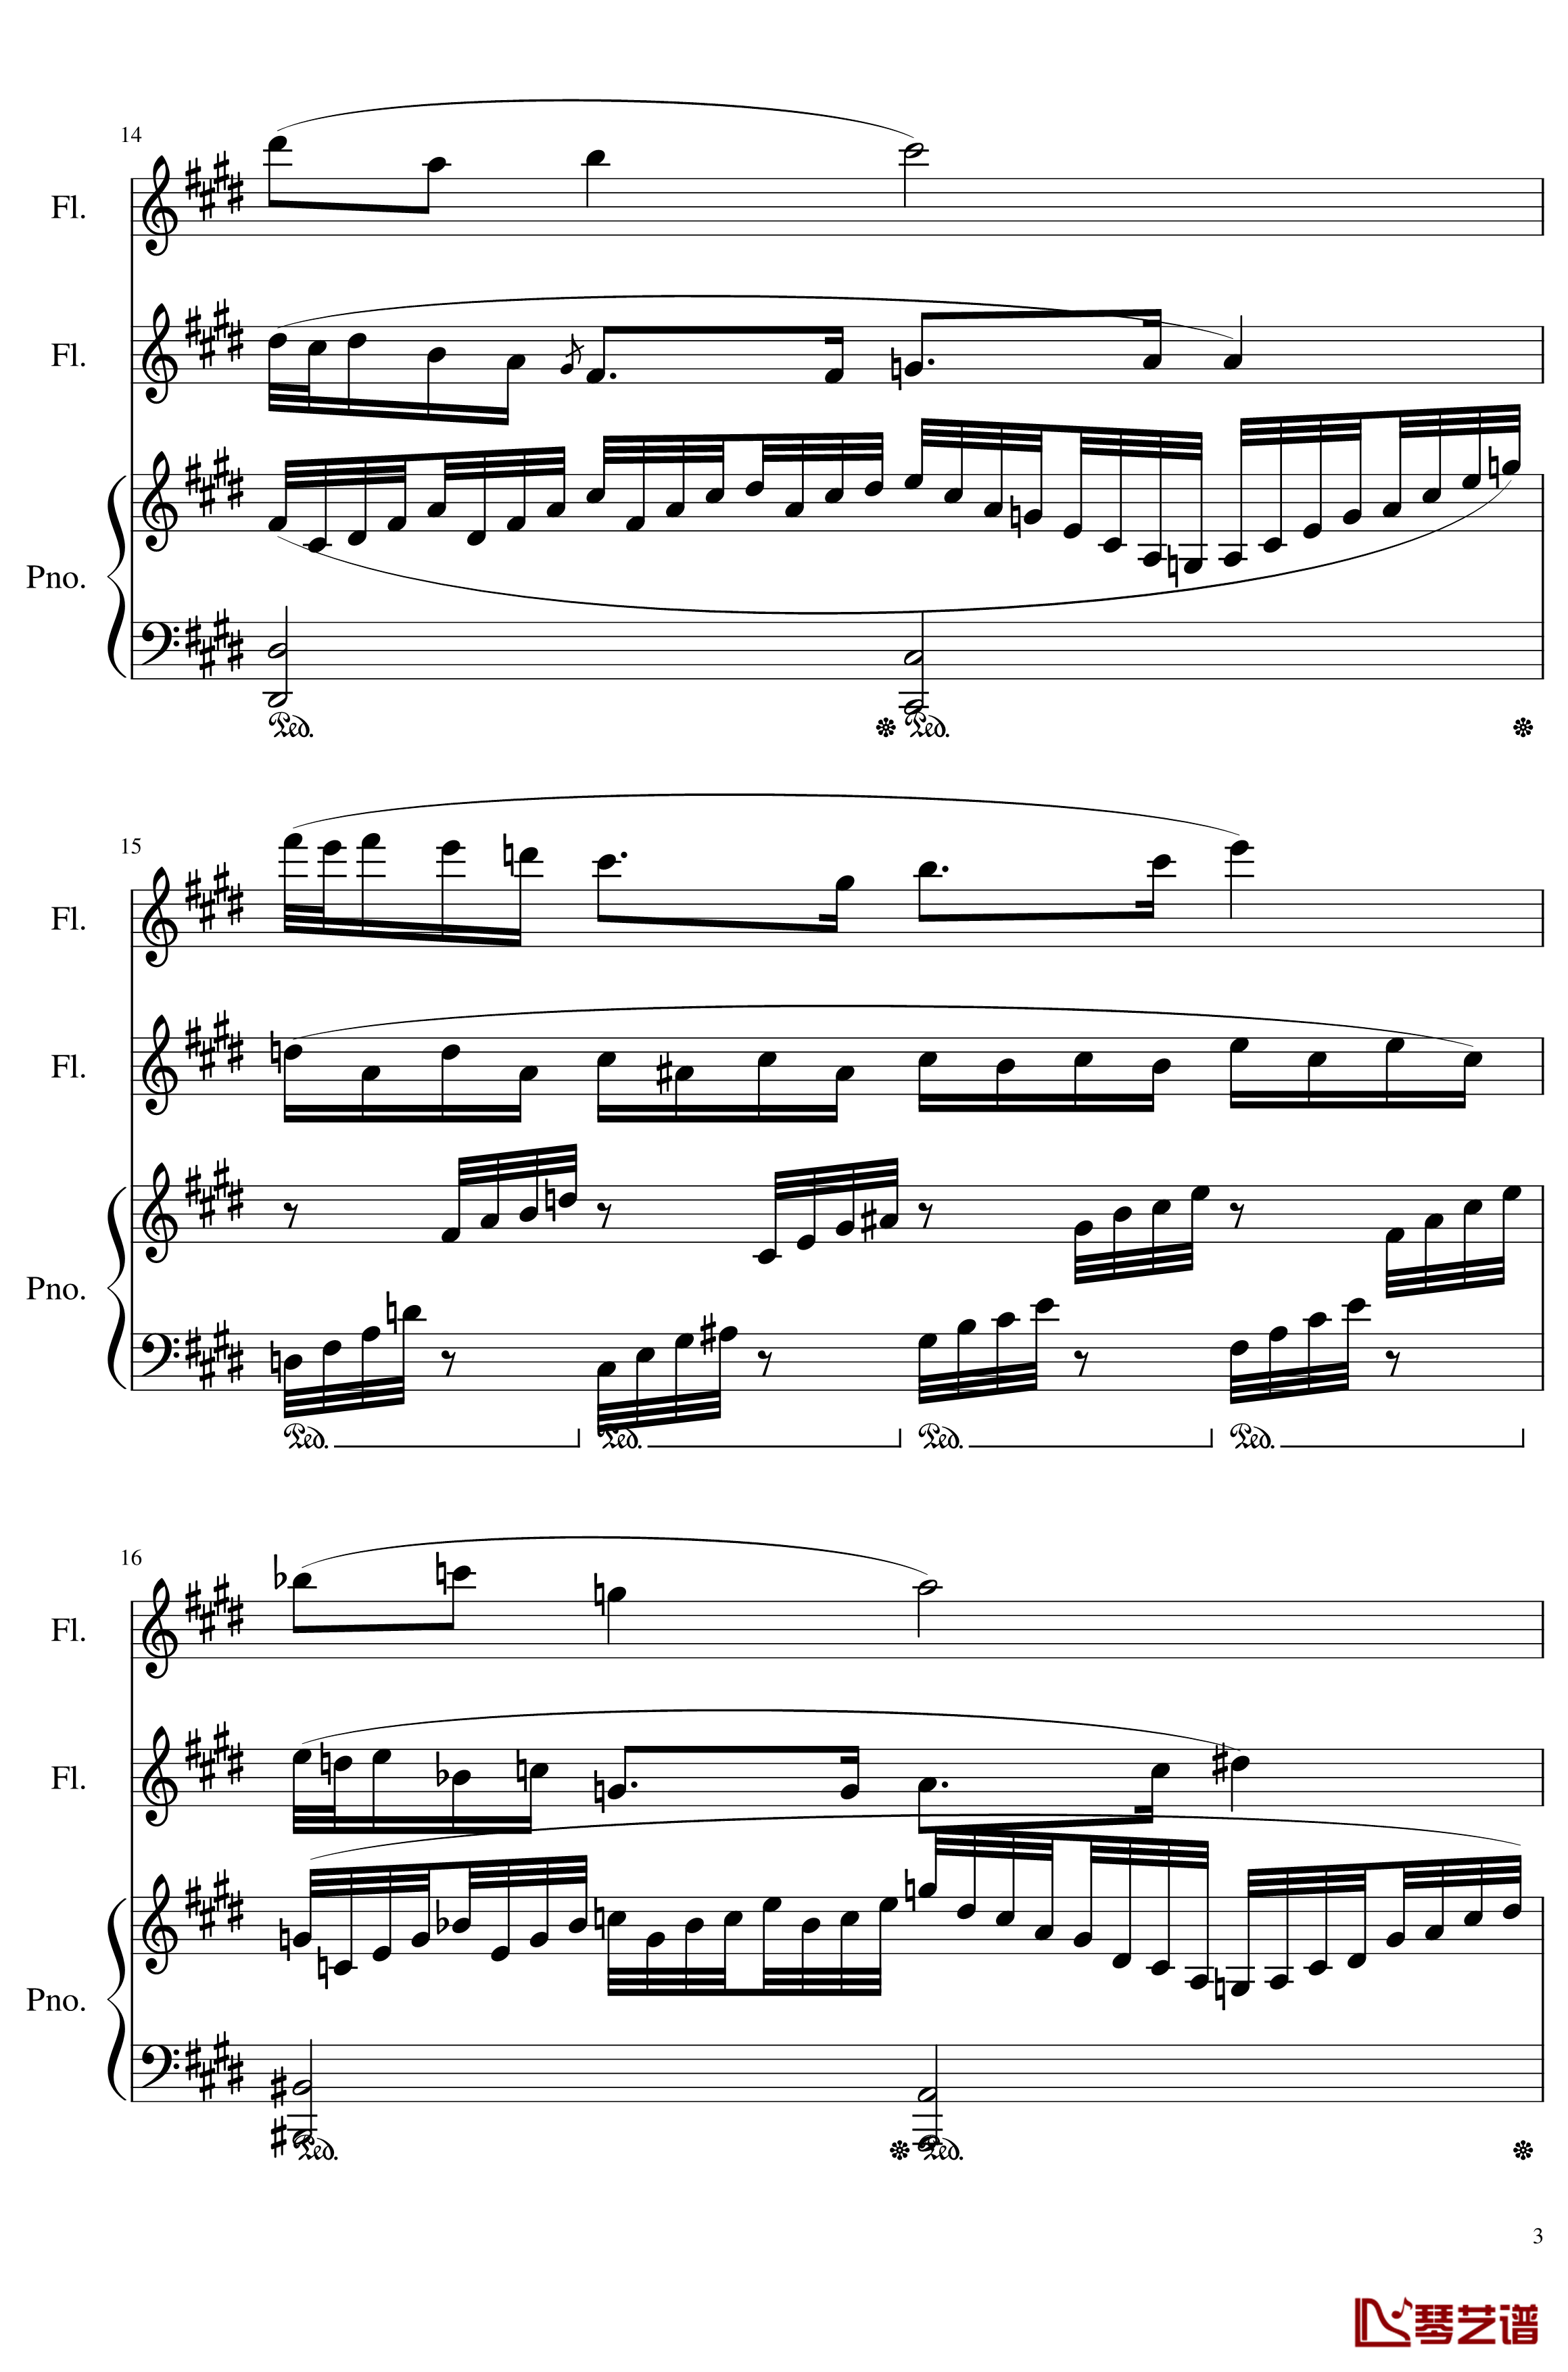 Trio for piano and flutes, Op.117 II.My personality钢琴谱-一个球